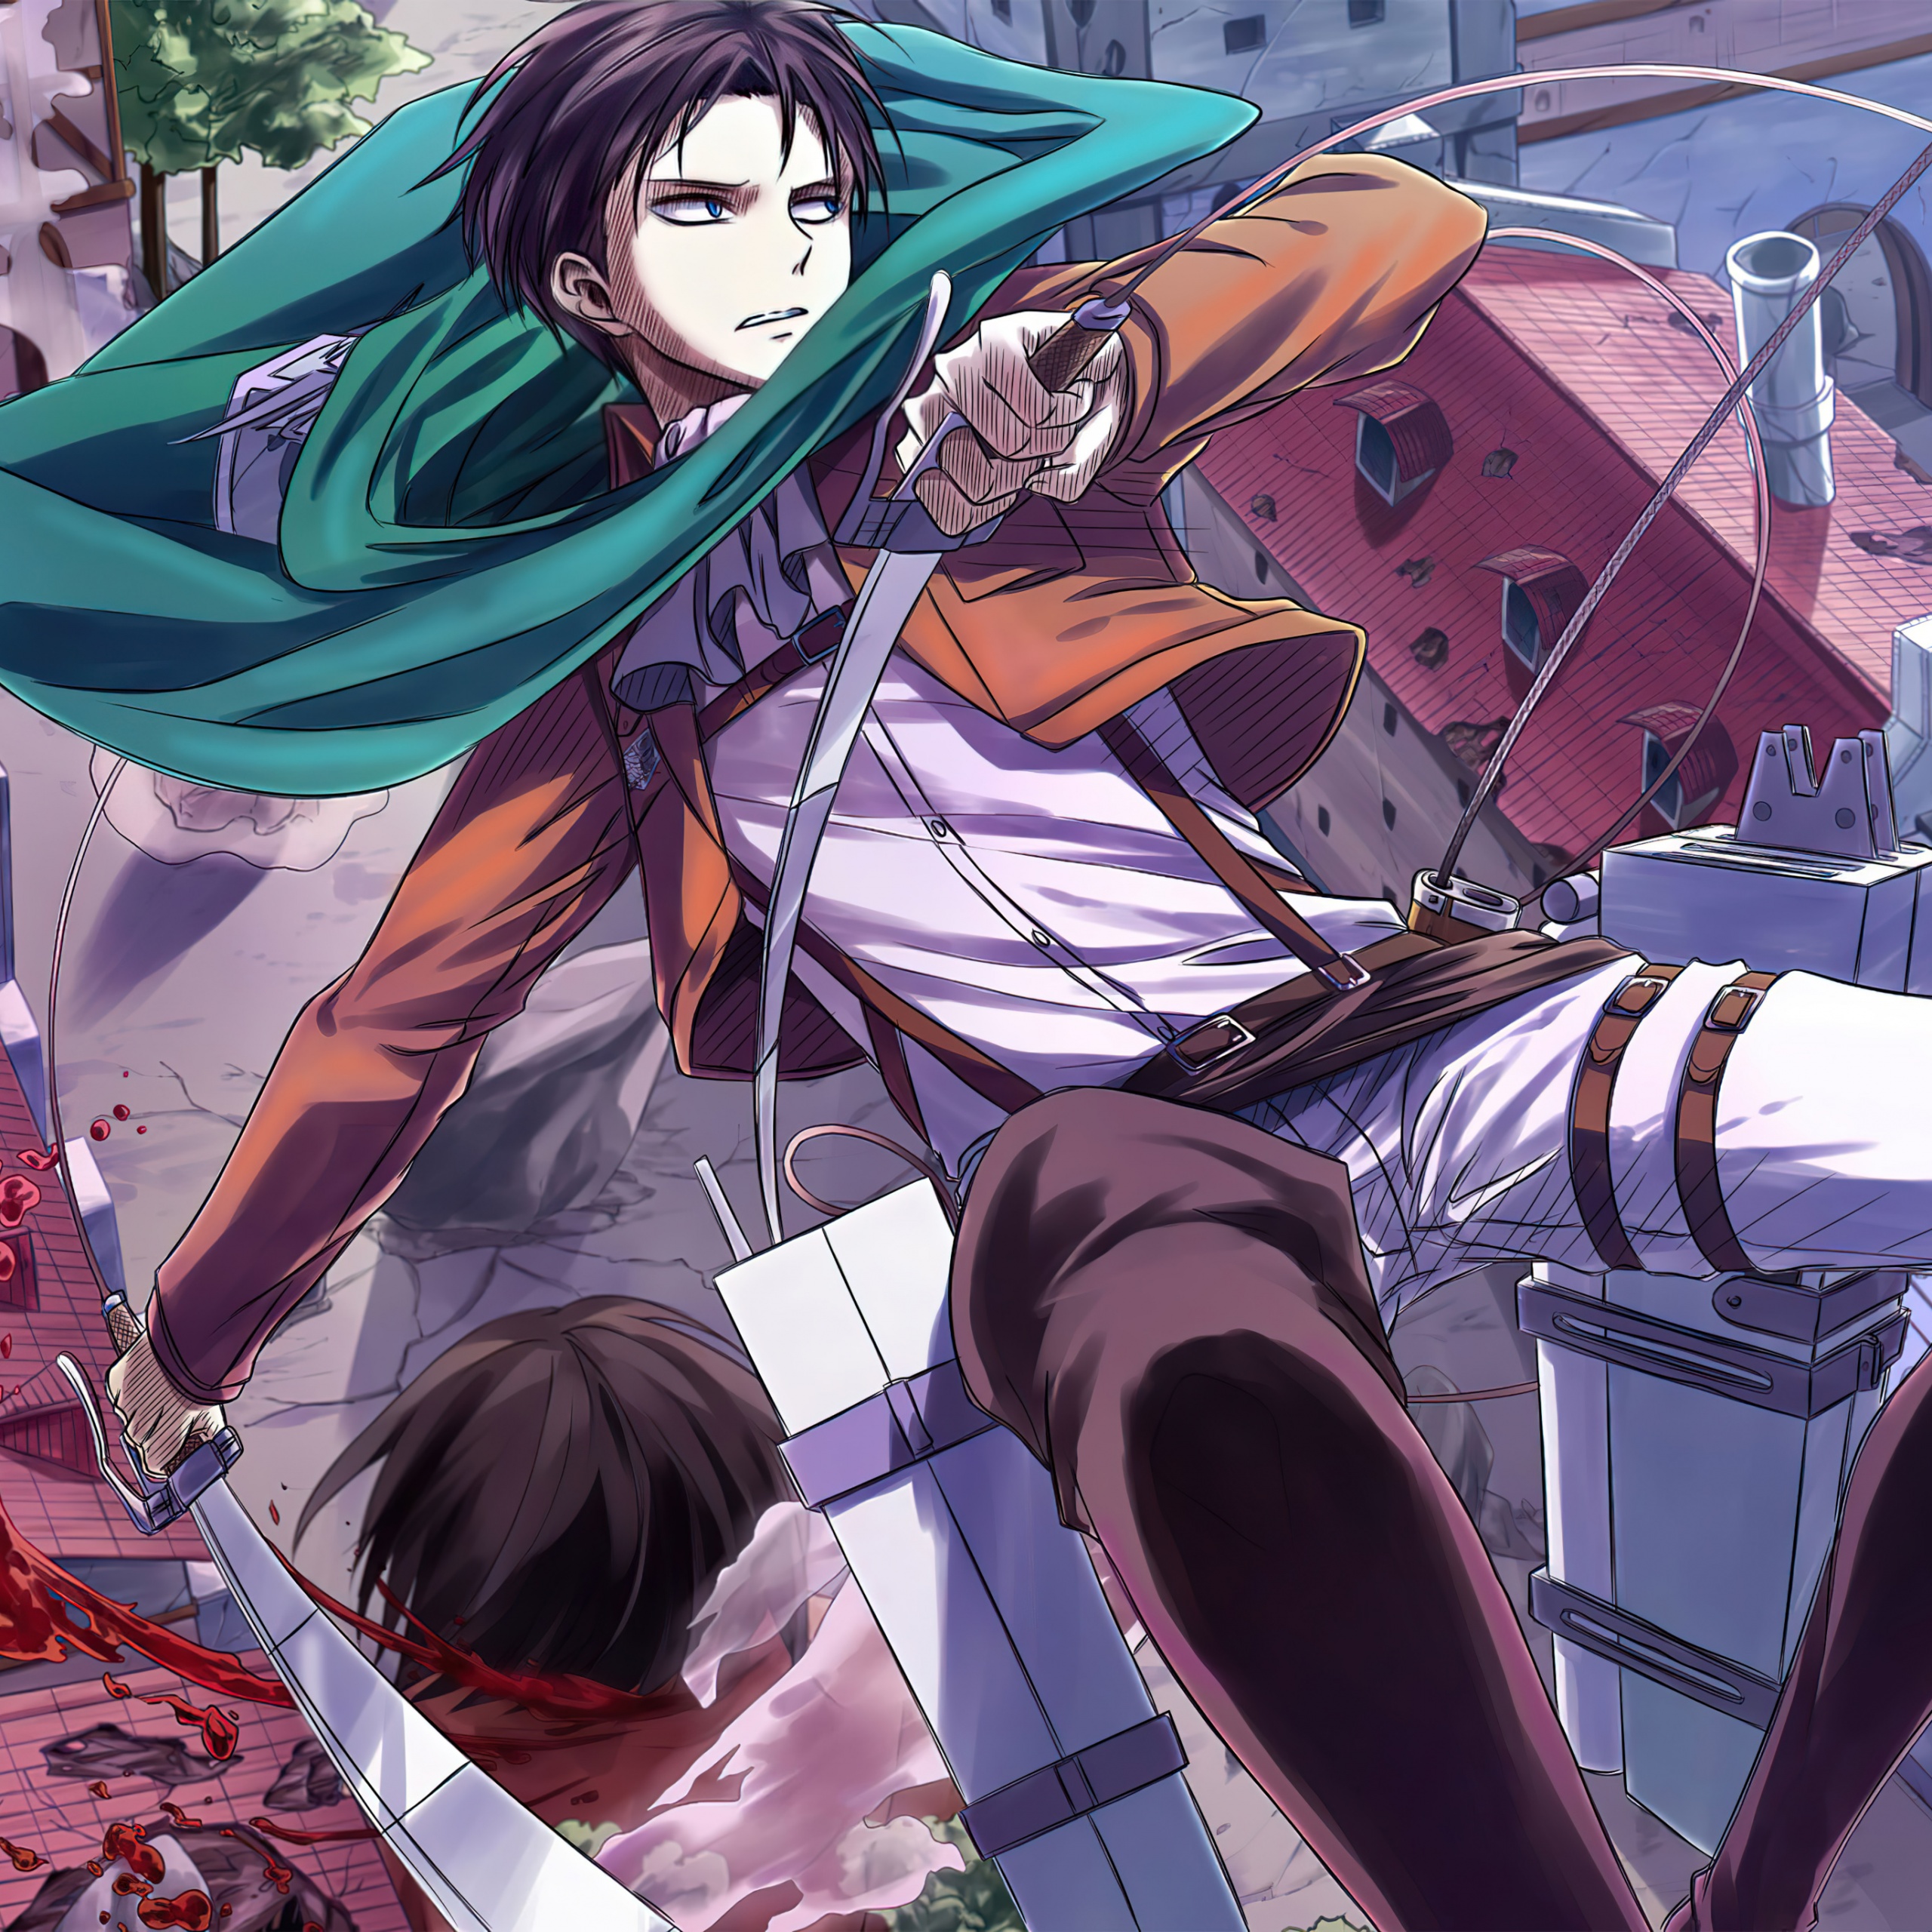 Anime levi ackerman from attack on titan gives thumbs up on Craiyon-demhanvico.com.vn